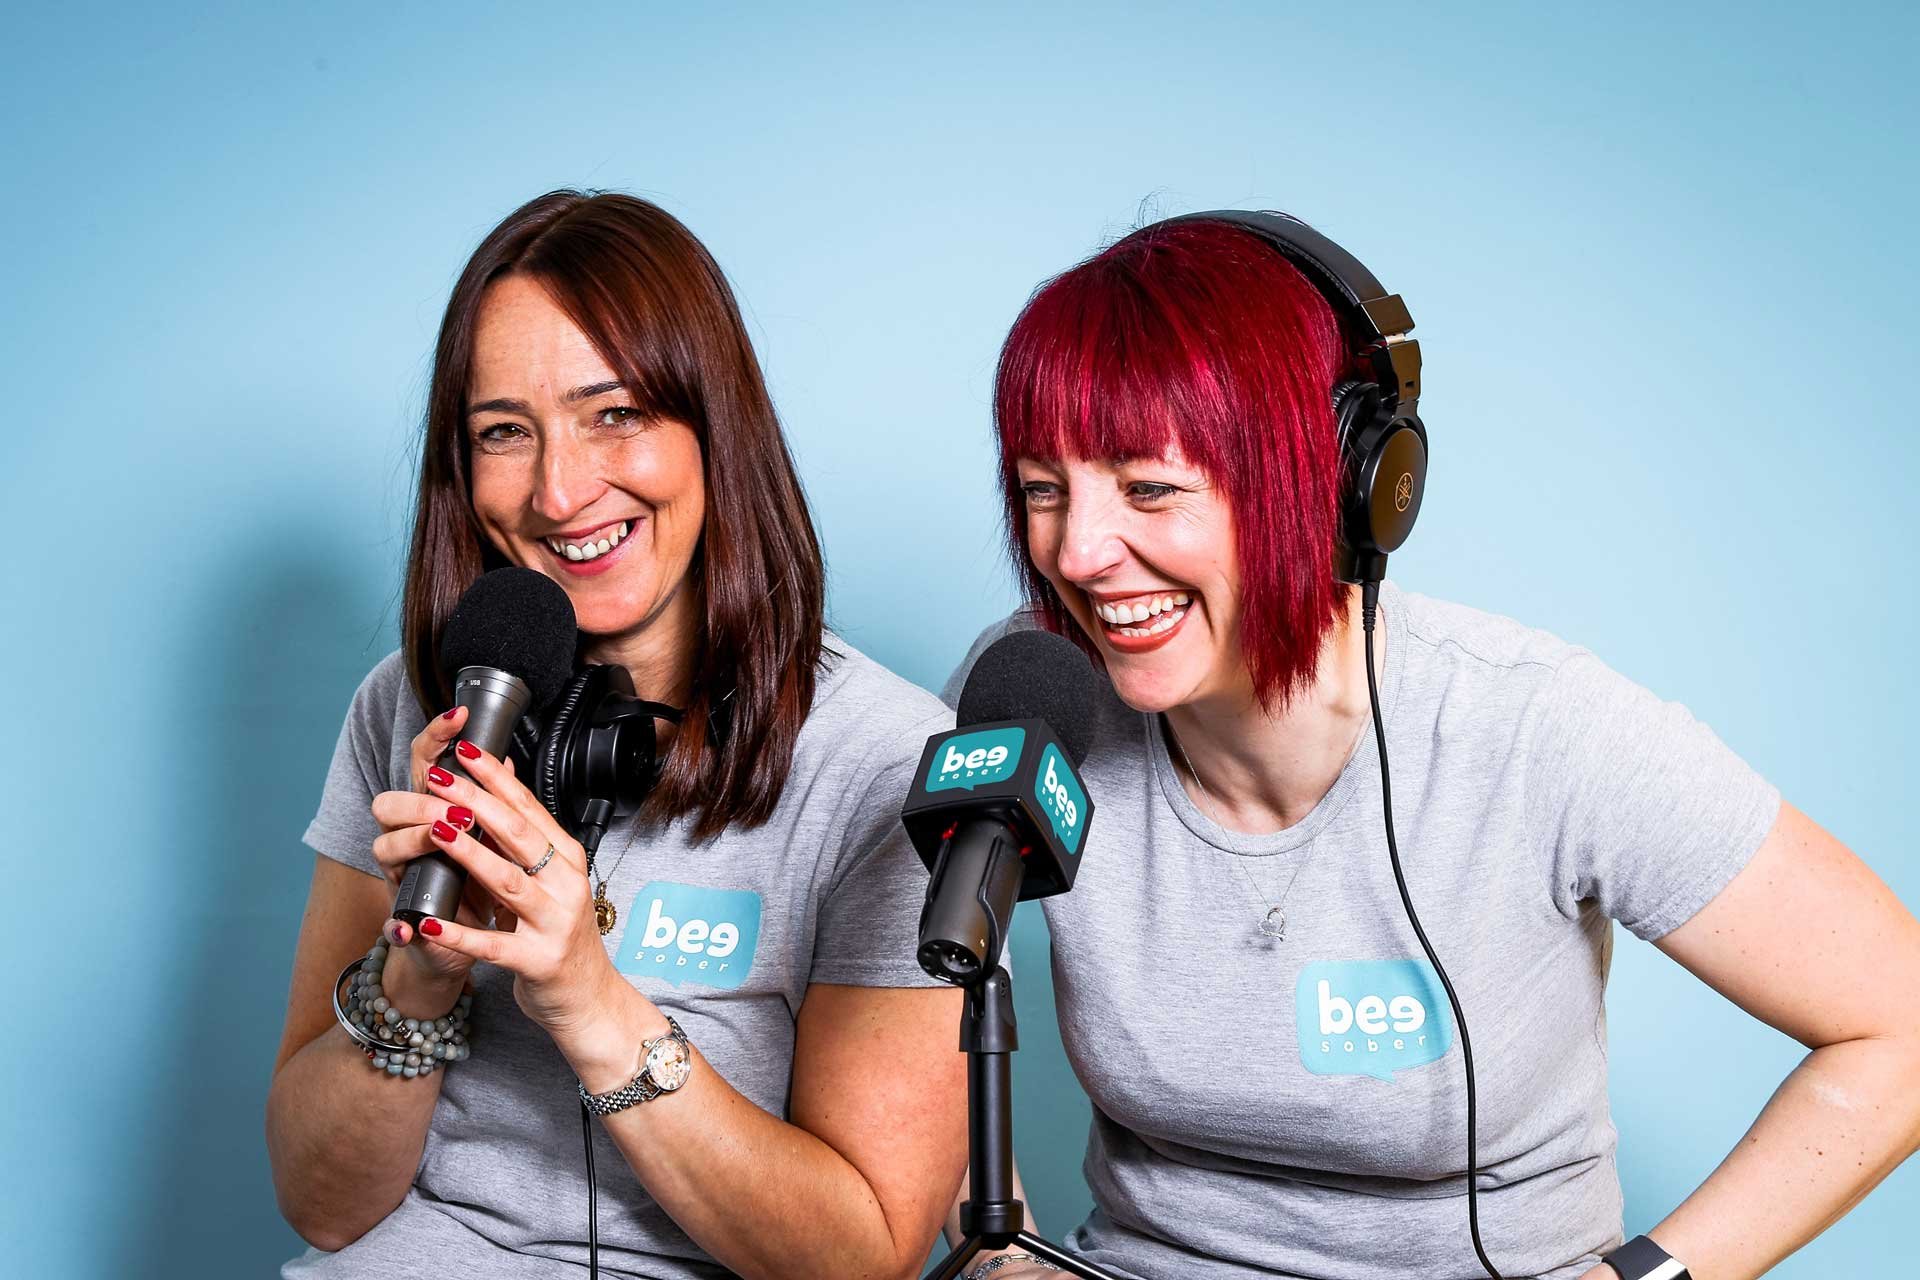 bee_sober-health_wellness-photography-lifestyle-two_women_smiling_podcast-tim_marner_branding_agency_bolton.jpeg